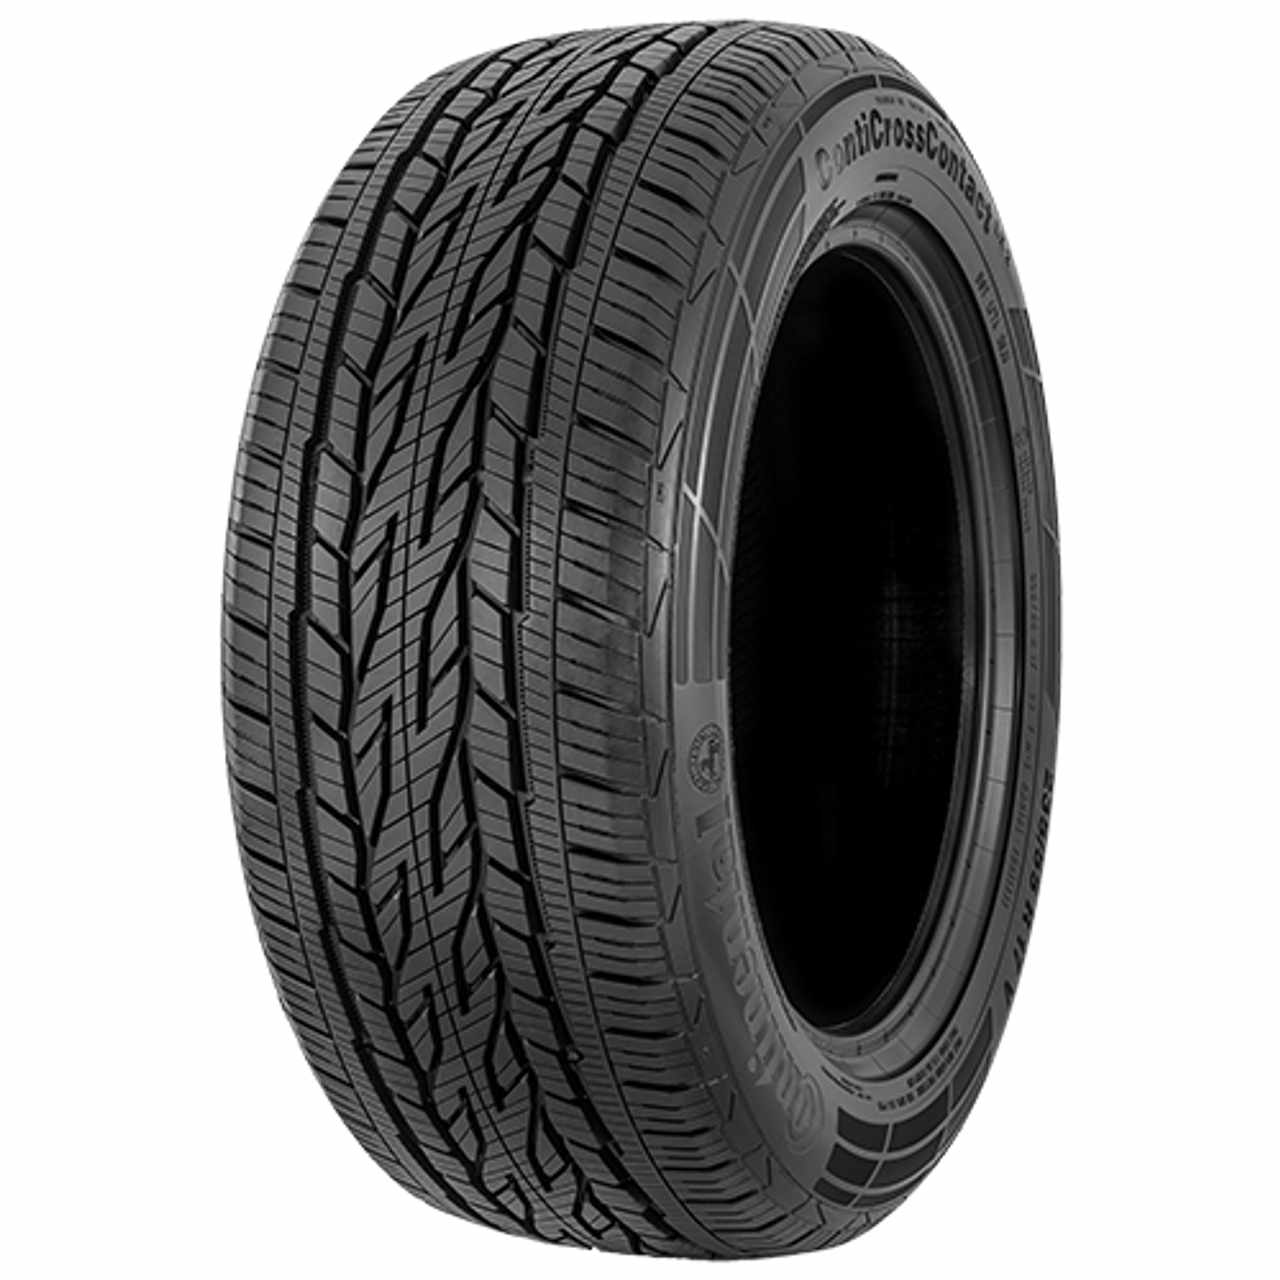 CONTINENTAL CONTICROSSCONTACT LX 2 (EVc) 275/60R20 119H FR BSW